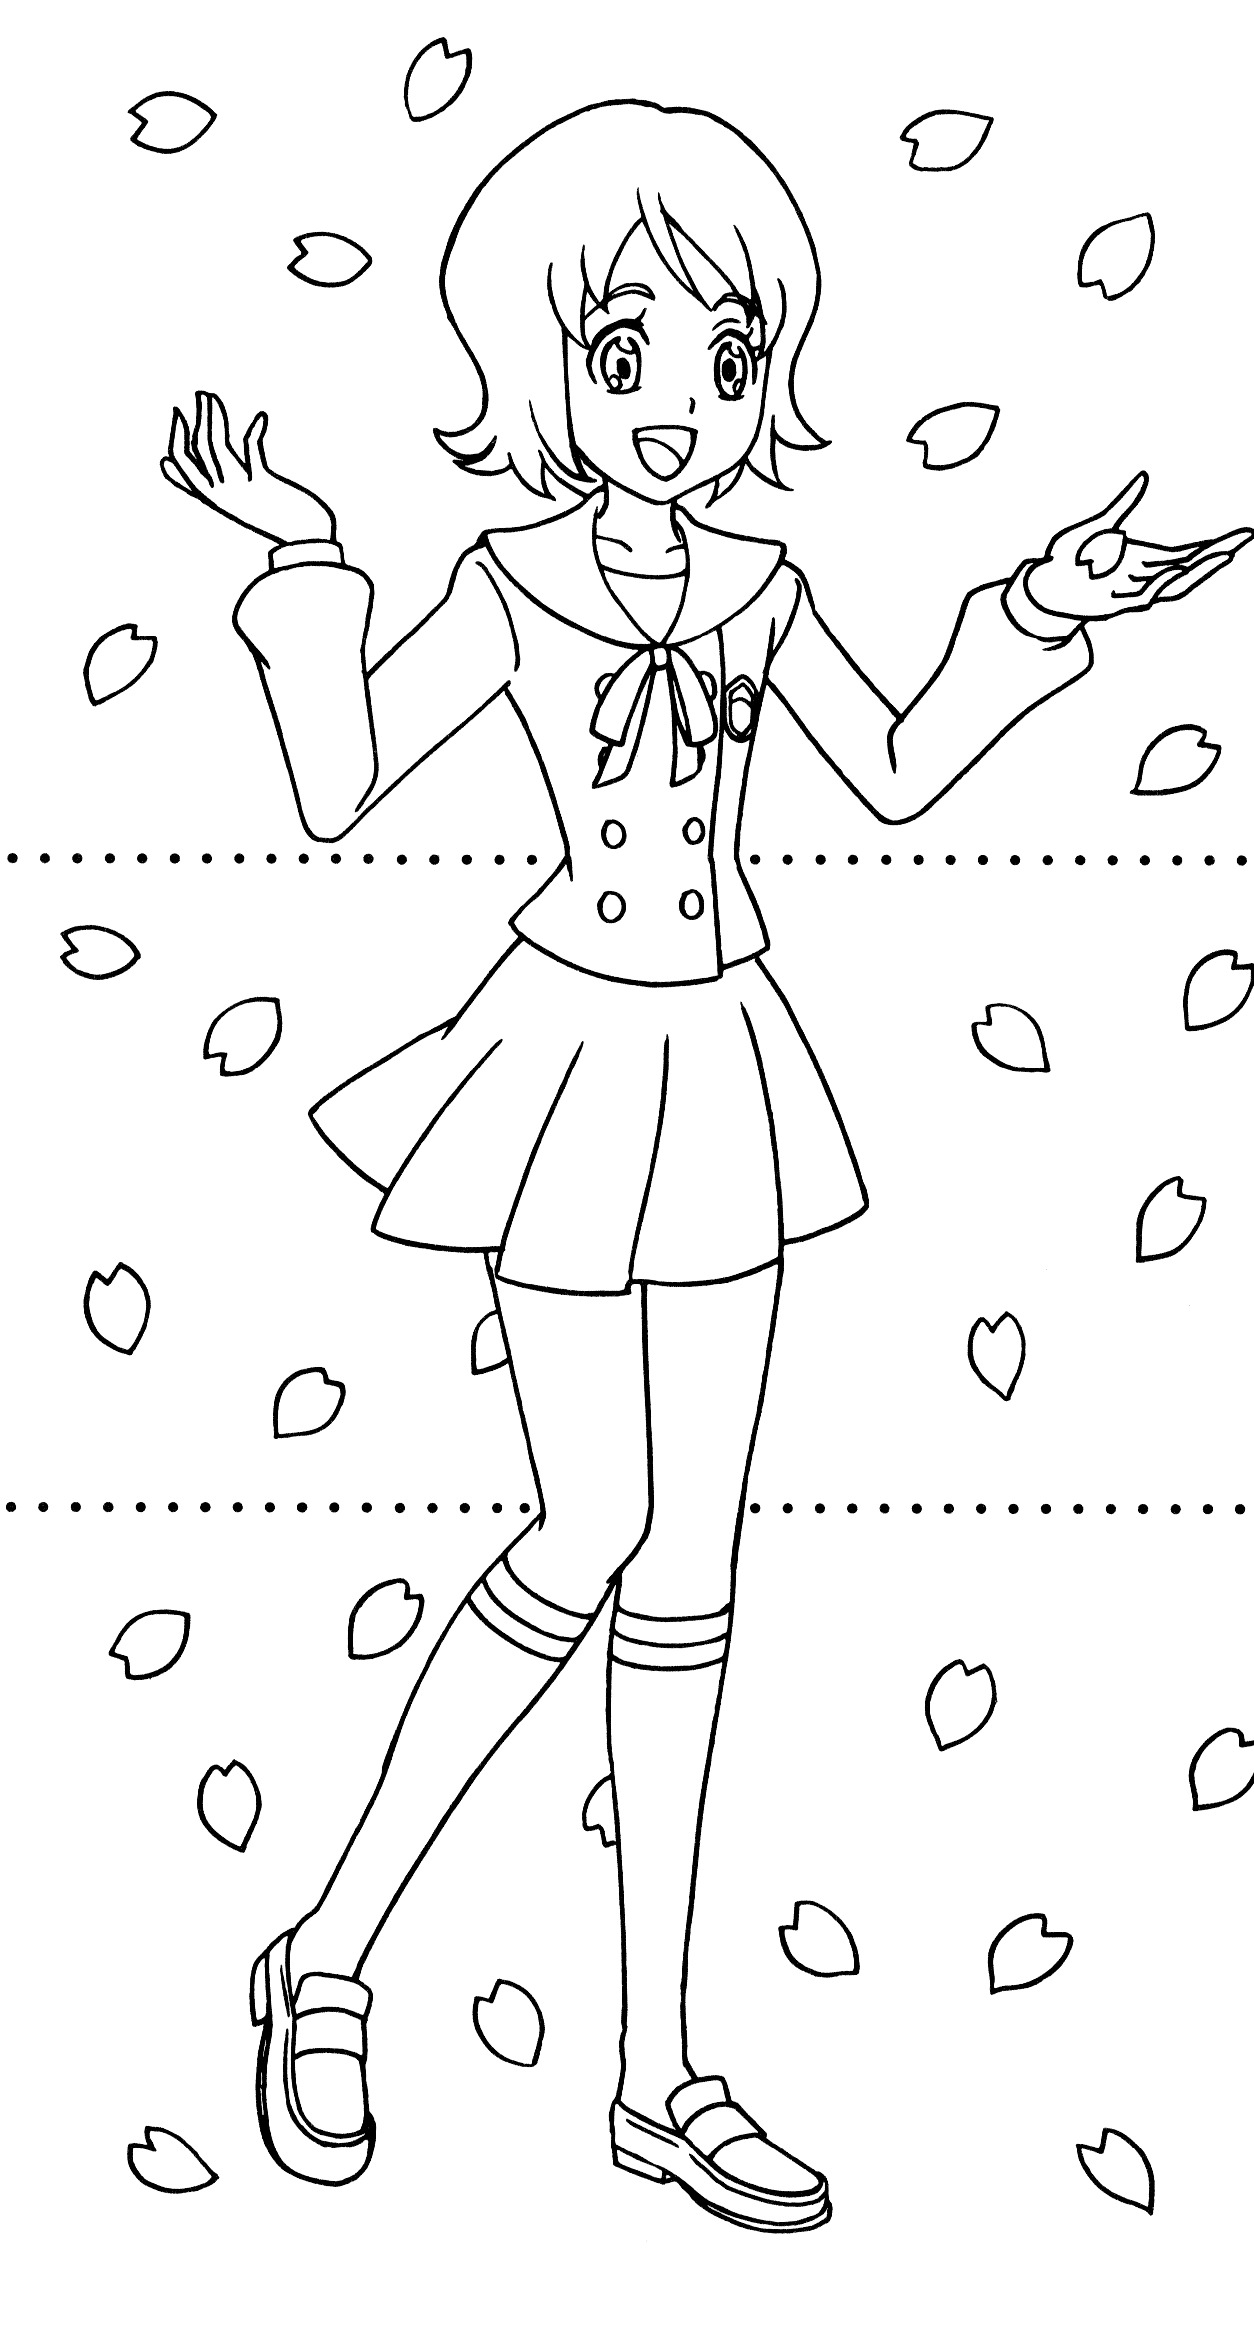 Happiness Charge Precure Dressup Coloring Book 13